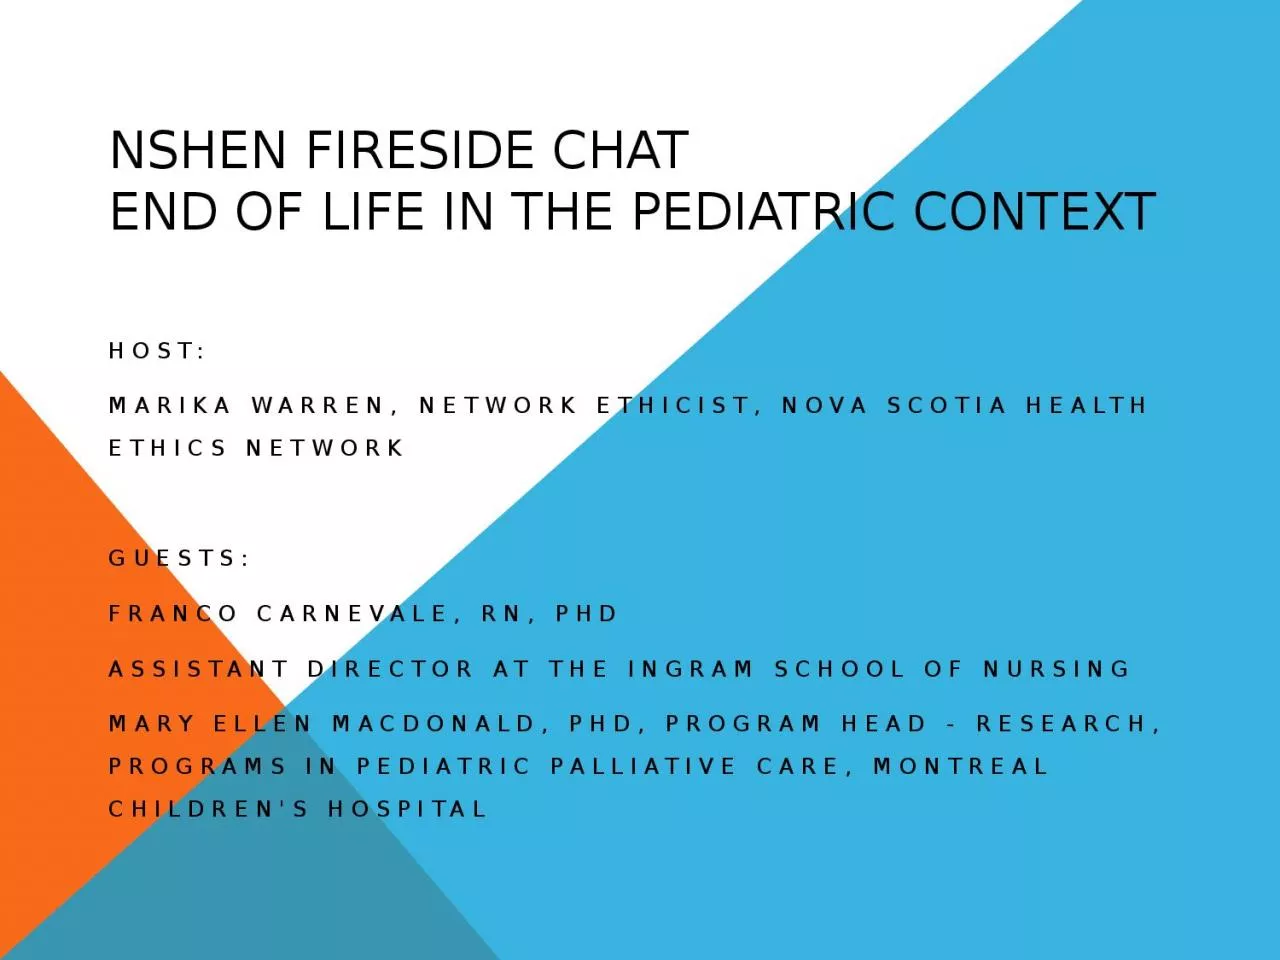 NSHEN Fireside Chat End of Life in the Pediatric Context